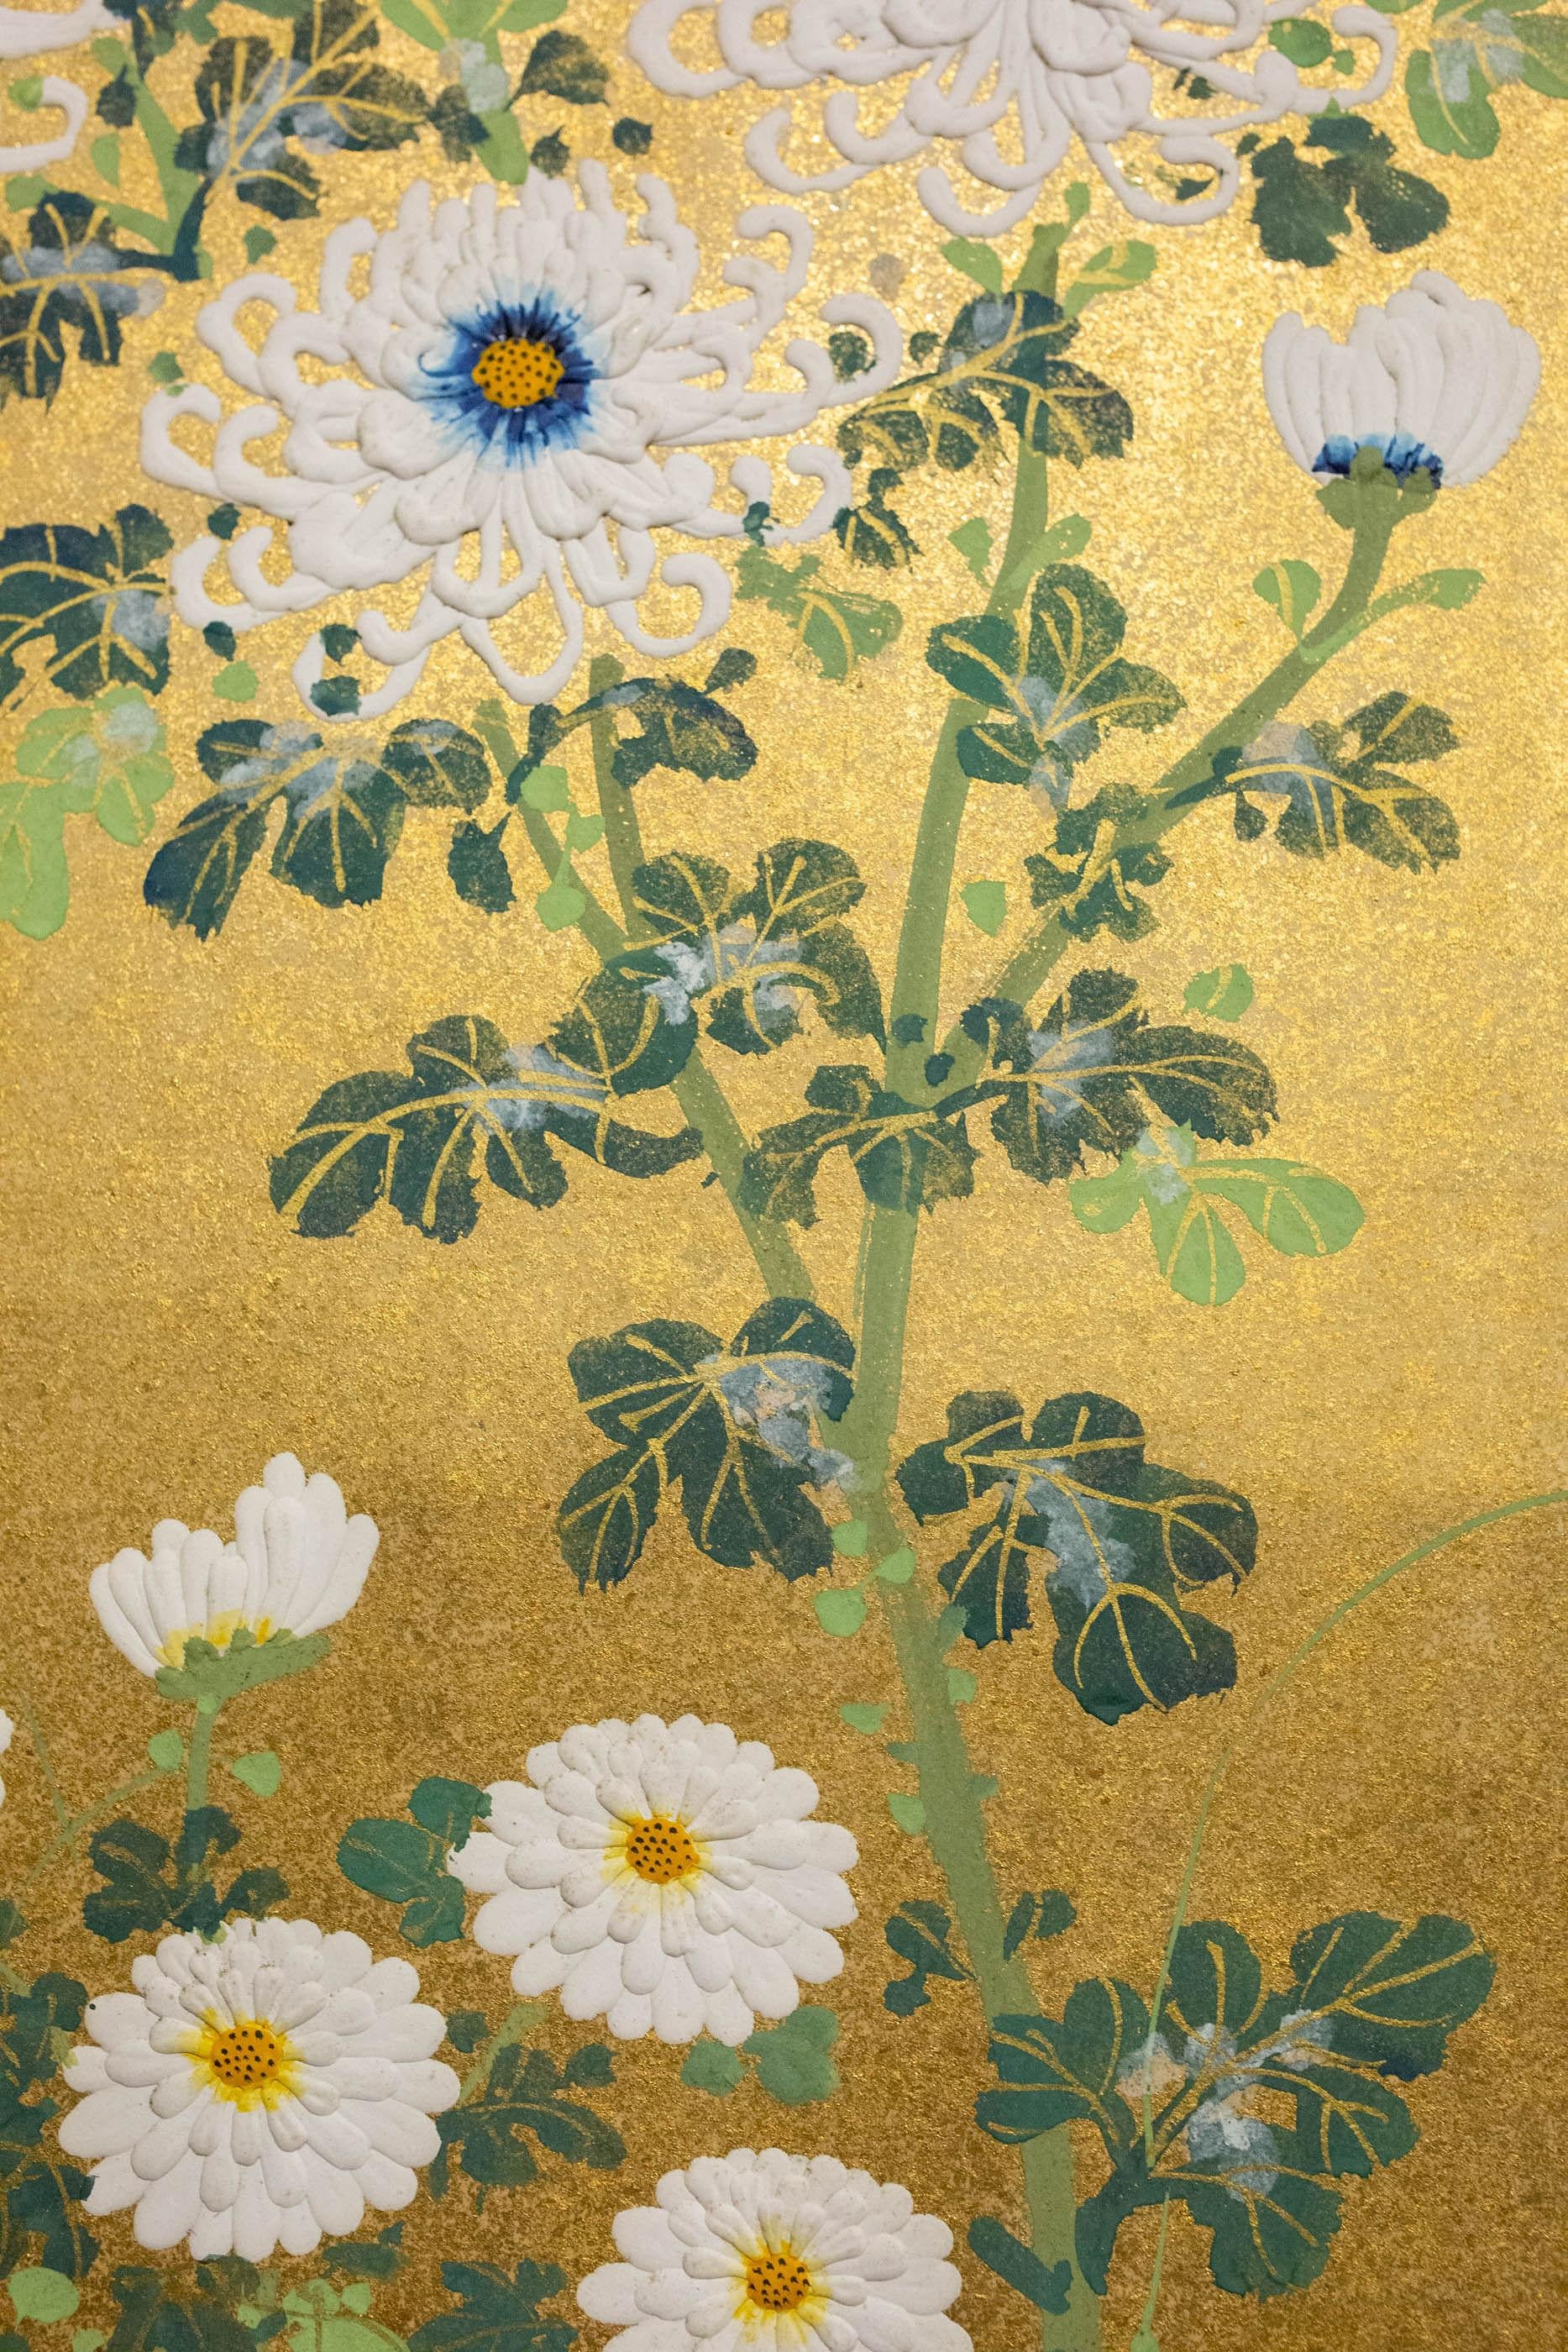 Detailed painting of varieties of chrysanthemums behind a bound-twig garden fence rendered in silvered, raised gofun. Stylized low-hanging gold mist clouds. Rimpa-style painting in mineral pigments on paper with all-over gold dust, and silk brocade